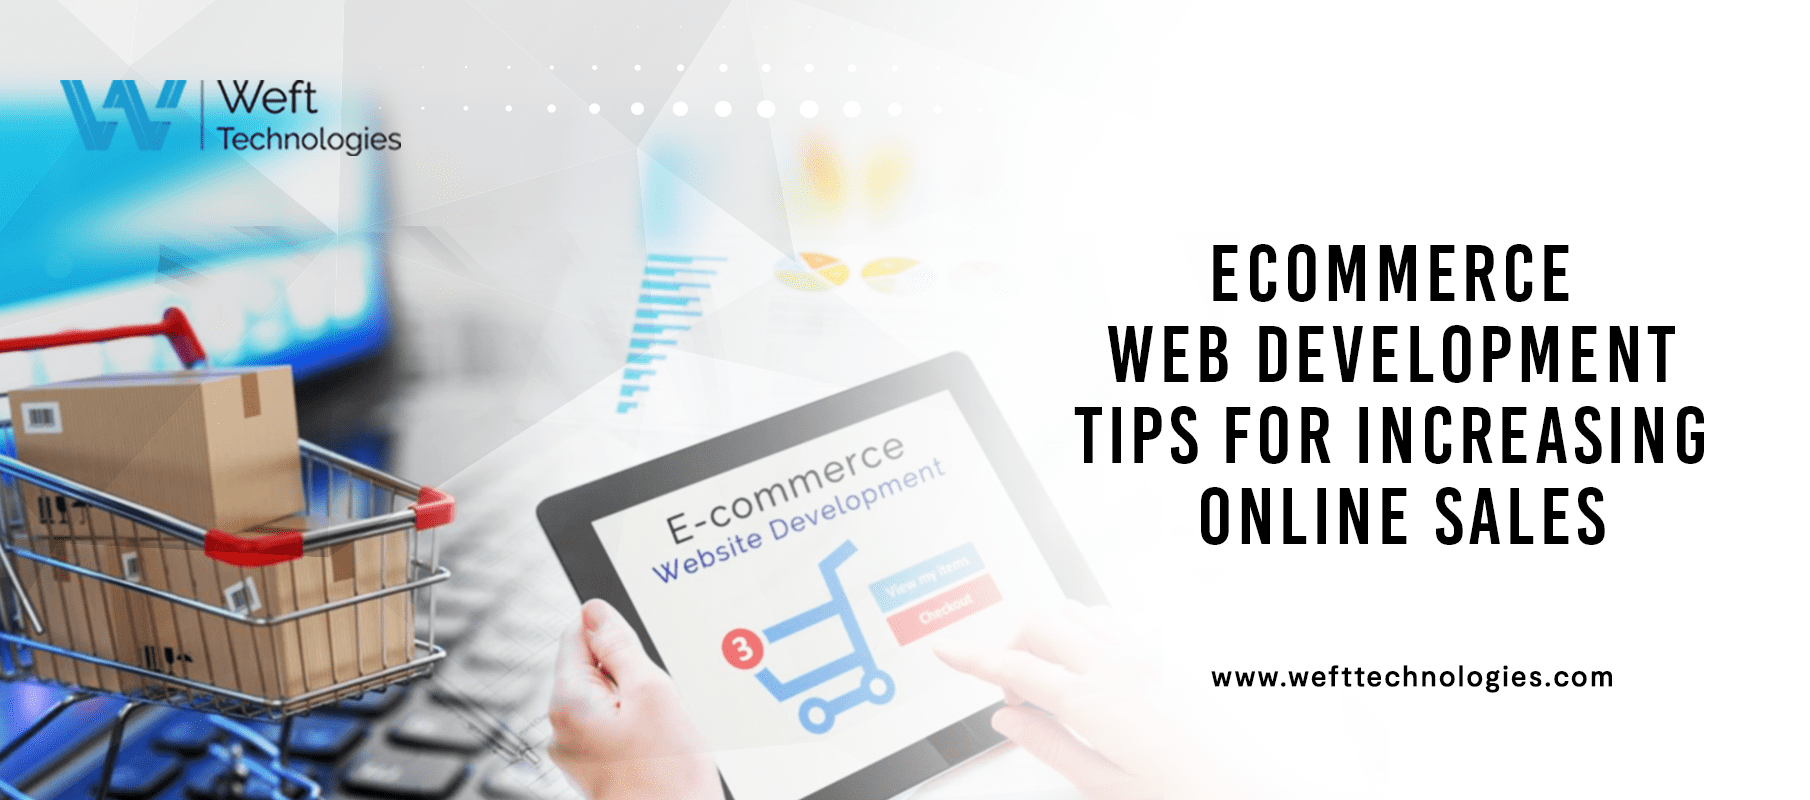 How to Build a Successful Ecommerce Website in 7 Steps?